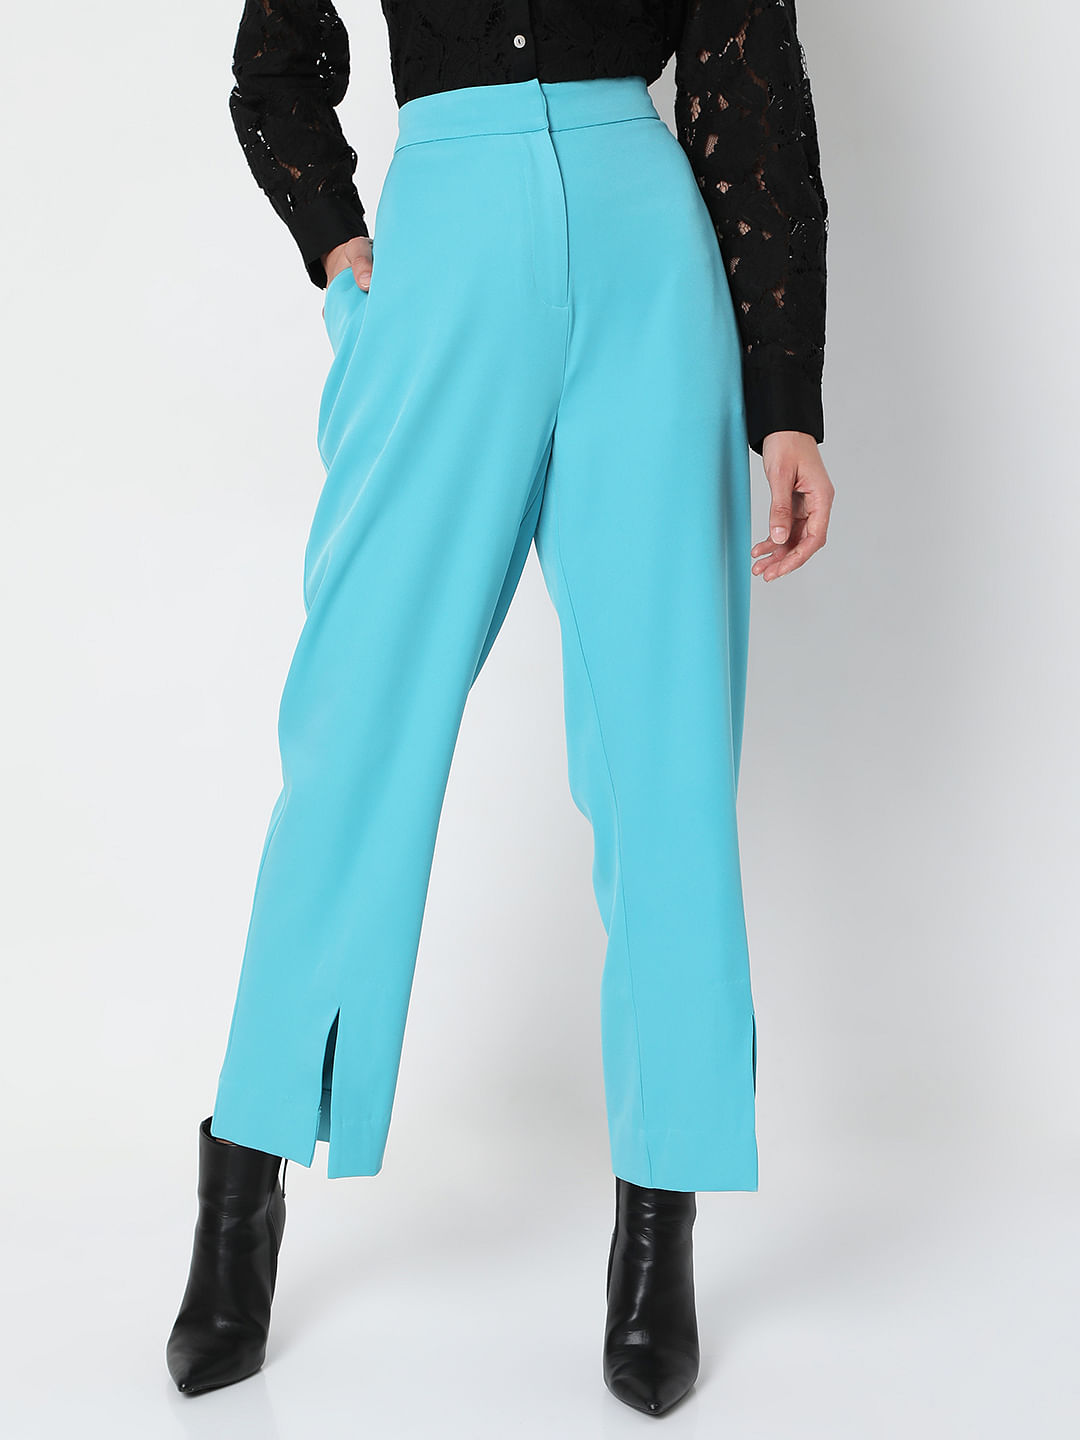 Vero Moda Women Loose Fit HighRise Trouser Price in India Full  Specifications  Offers  DTashioncom